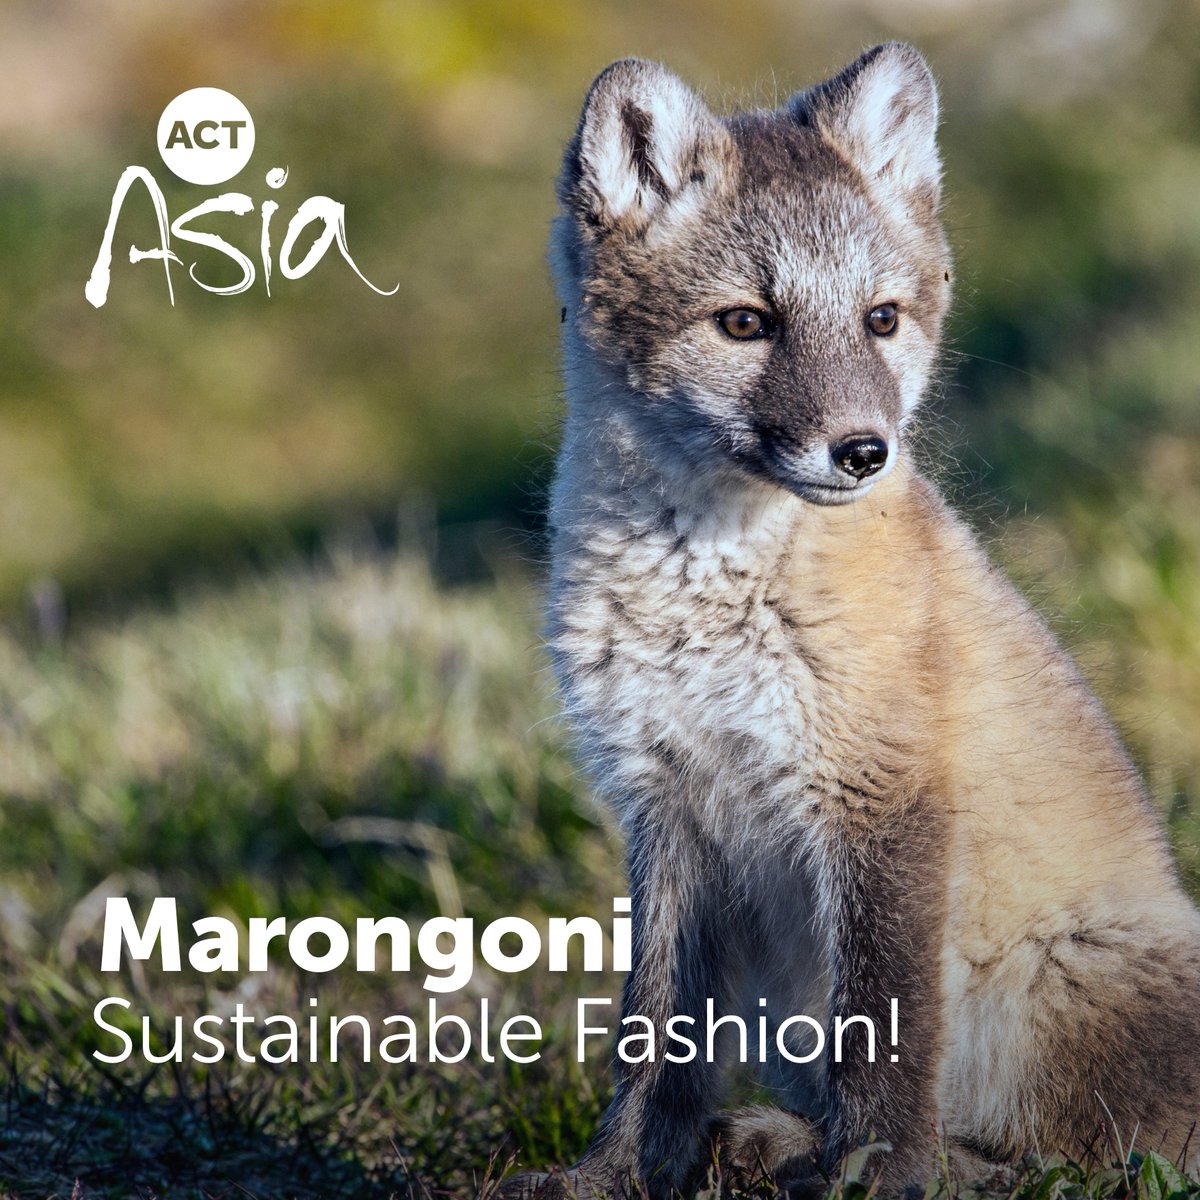 More News!

Fashion institute Istituto Marangoni in Shenzhen, signs co-op agreement with ACTAsia!   

Including designing & teaching a new sustainable fashion curriculum integrating our Compassion in Fashion course

tinyurl.com/kc3byu99 

#CrueltyFree  #AnimalRights  #FurFree